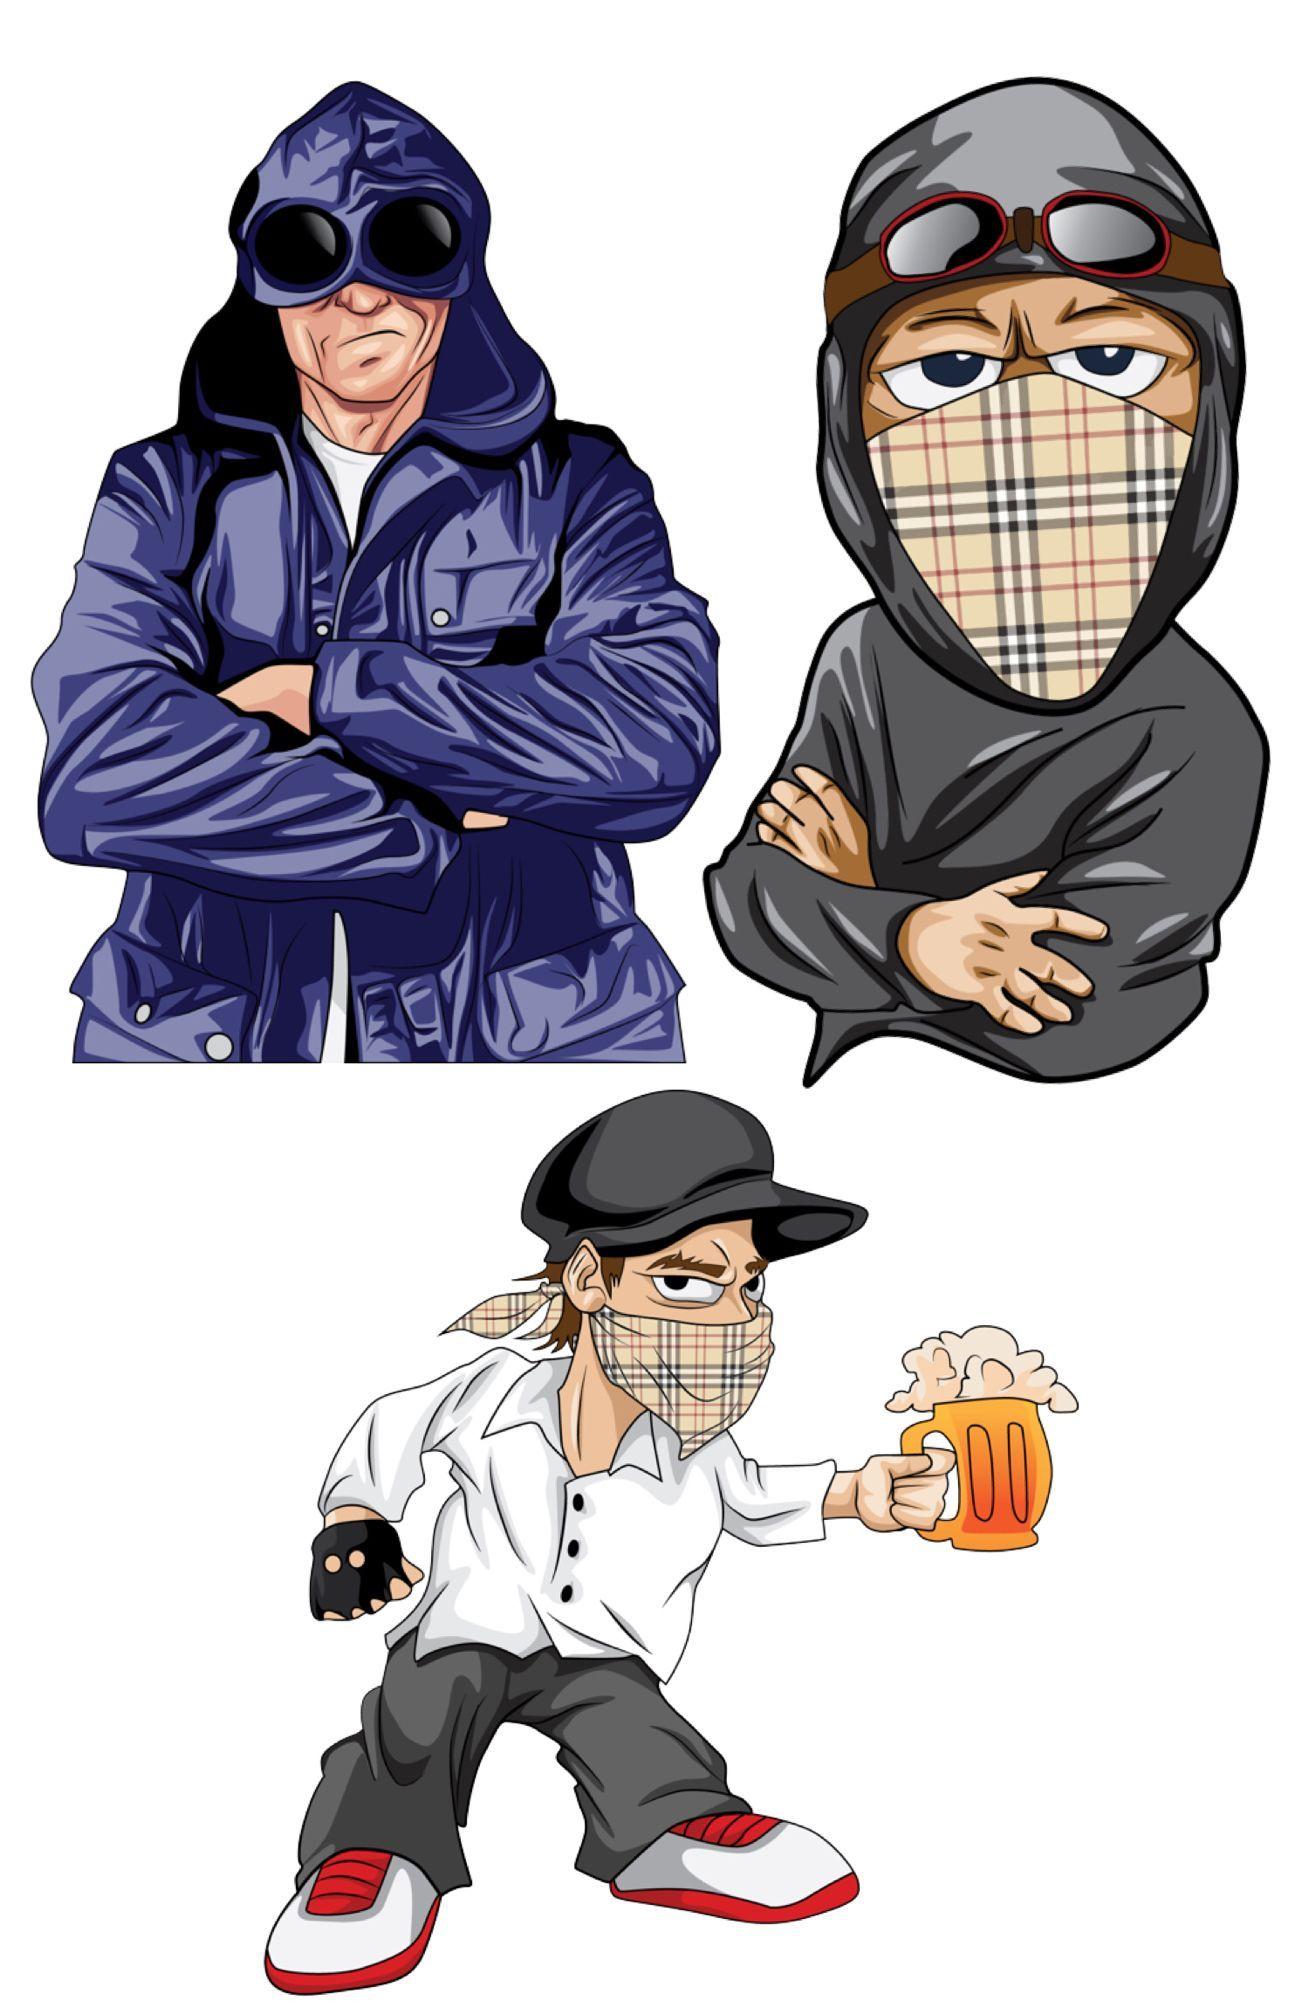 Just done these new vector #hooligan #hooligans #casuals image to